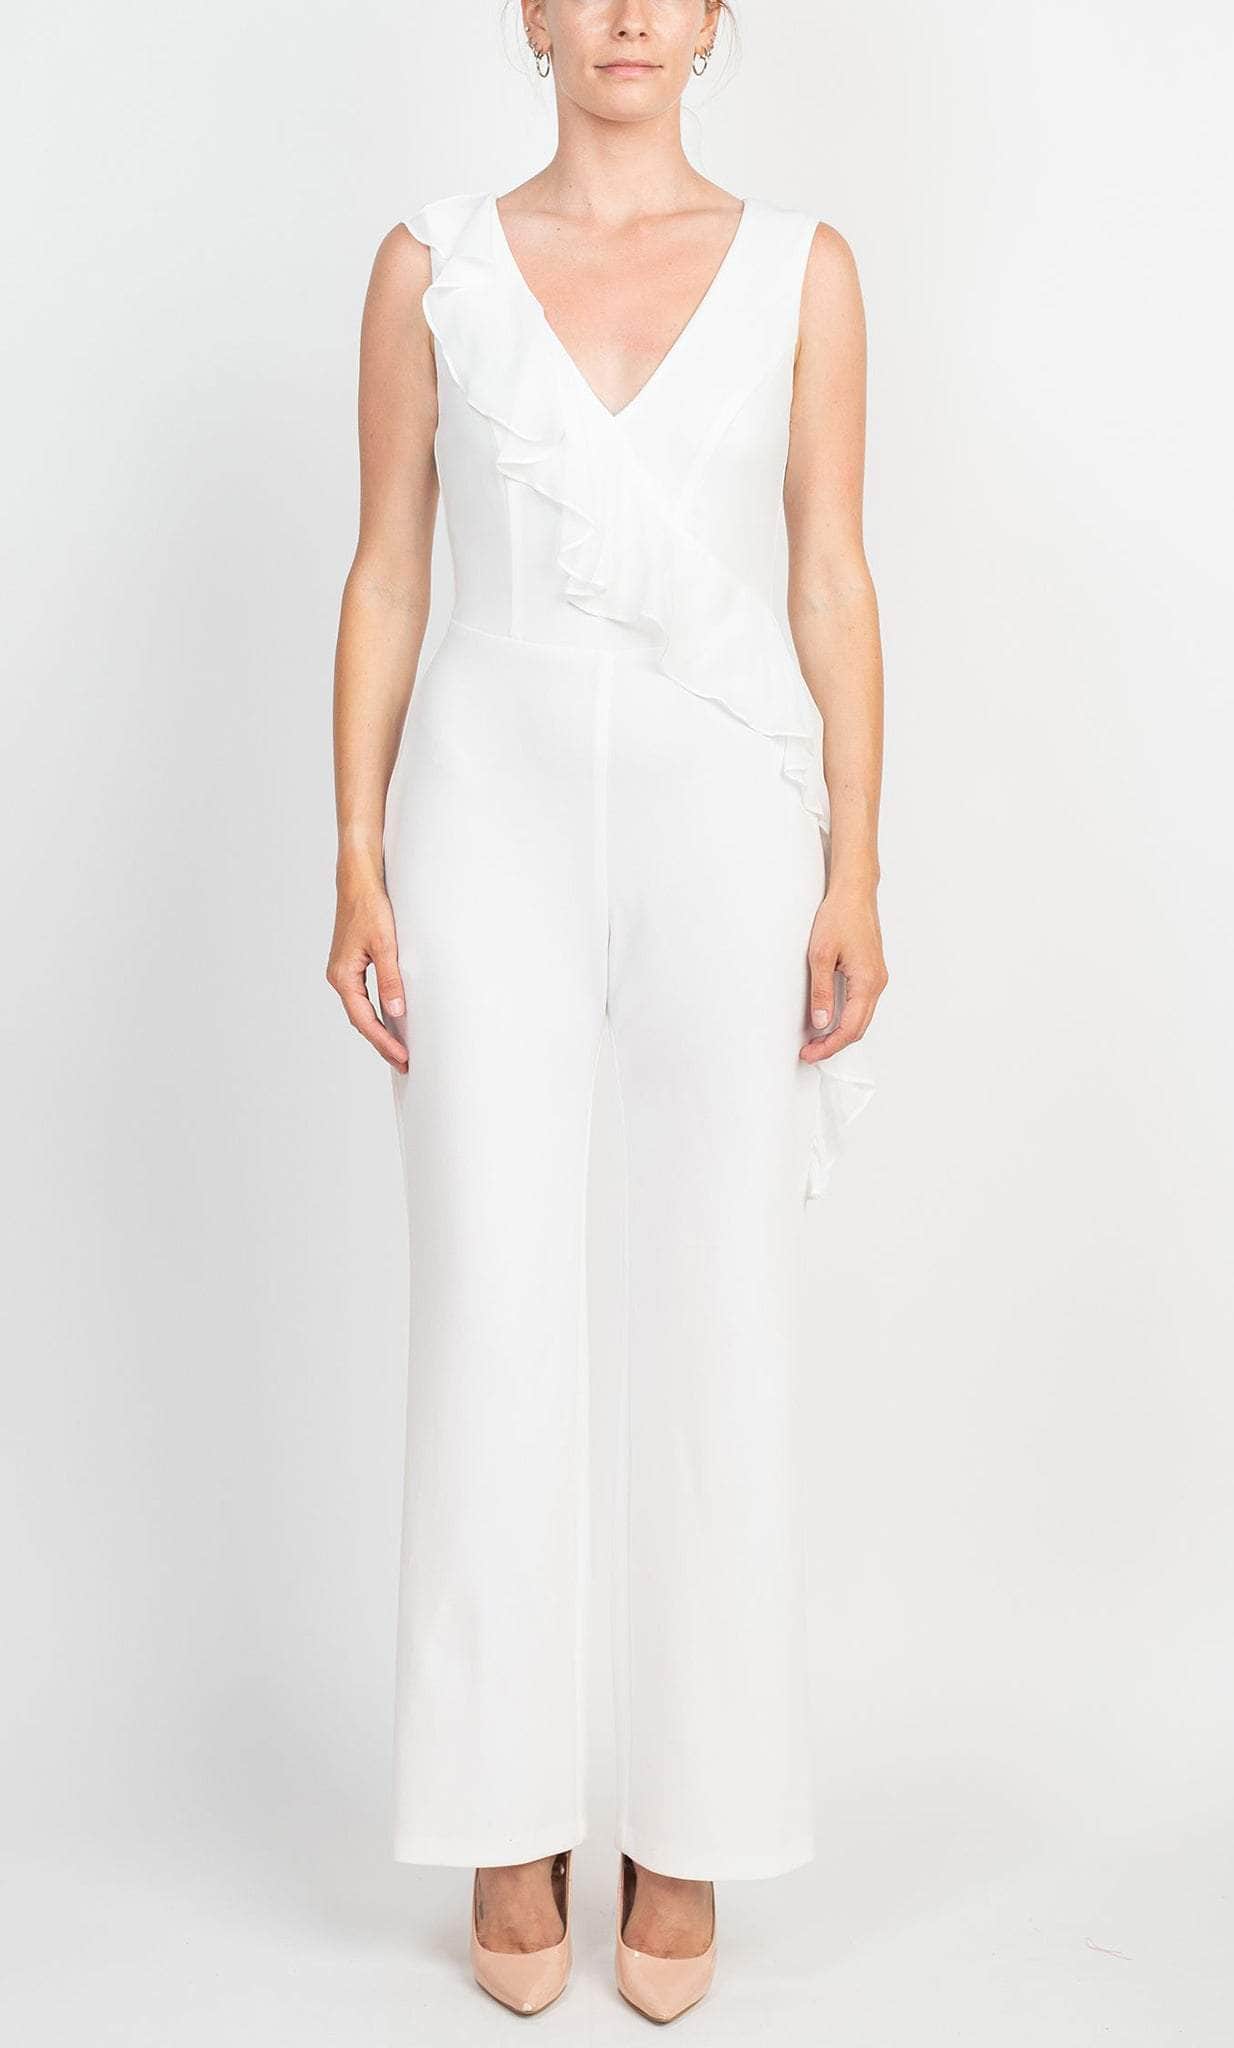 Image of Connected Apparel TJE48170M1 - Sleeveless Ruffled Evening Pantsuit